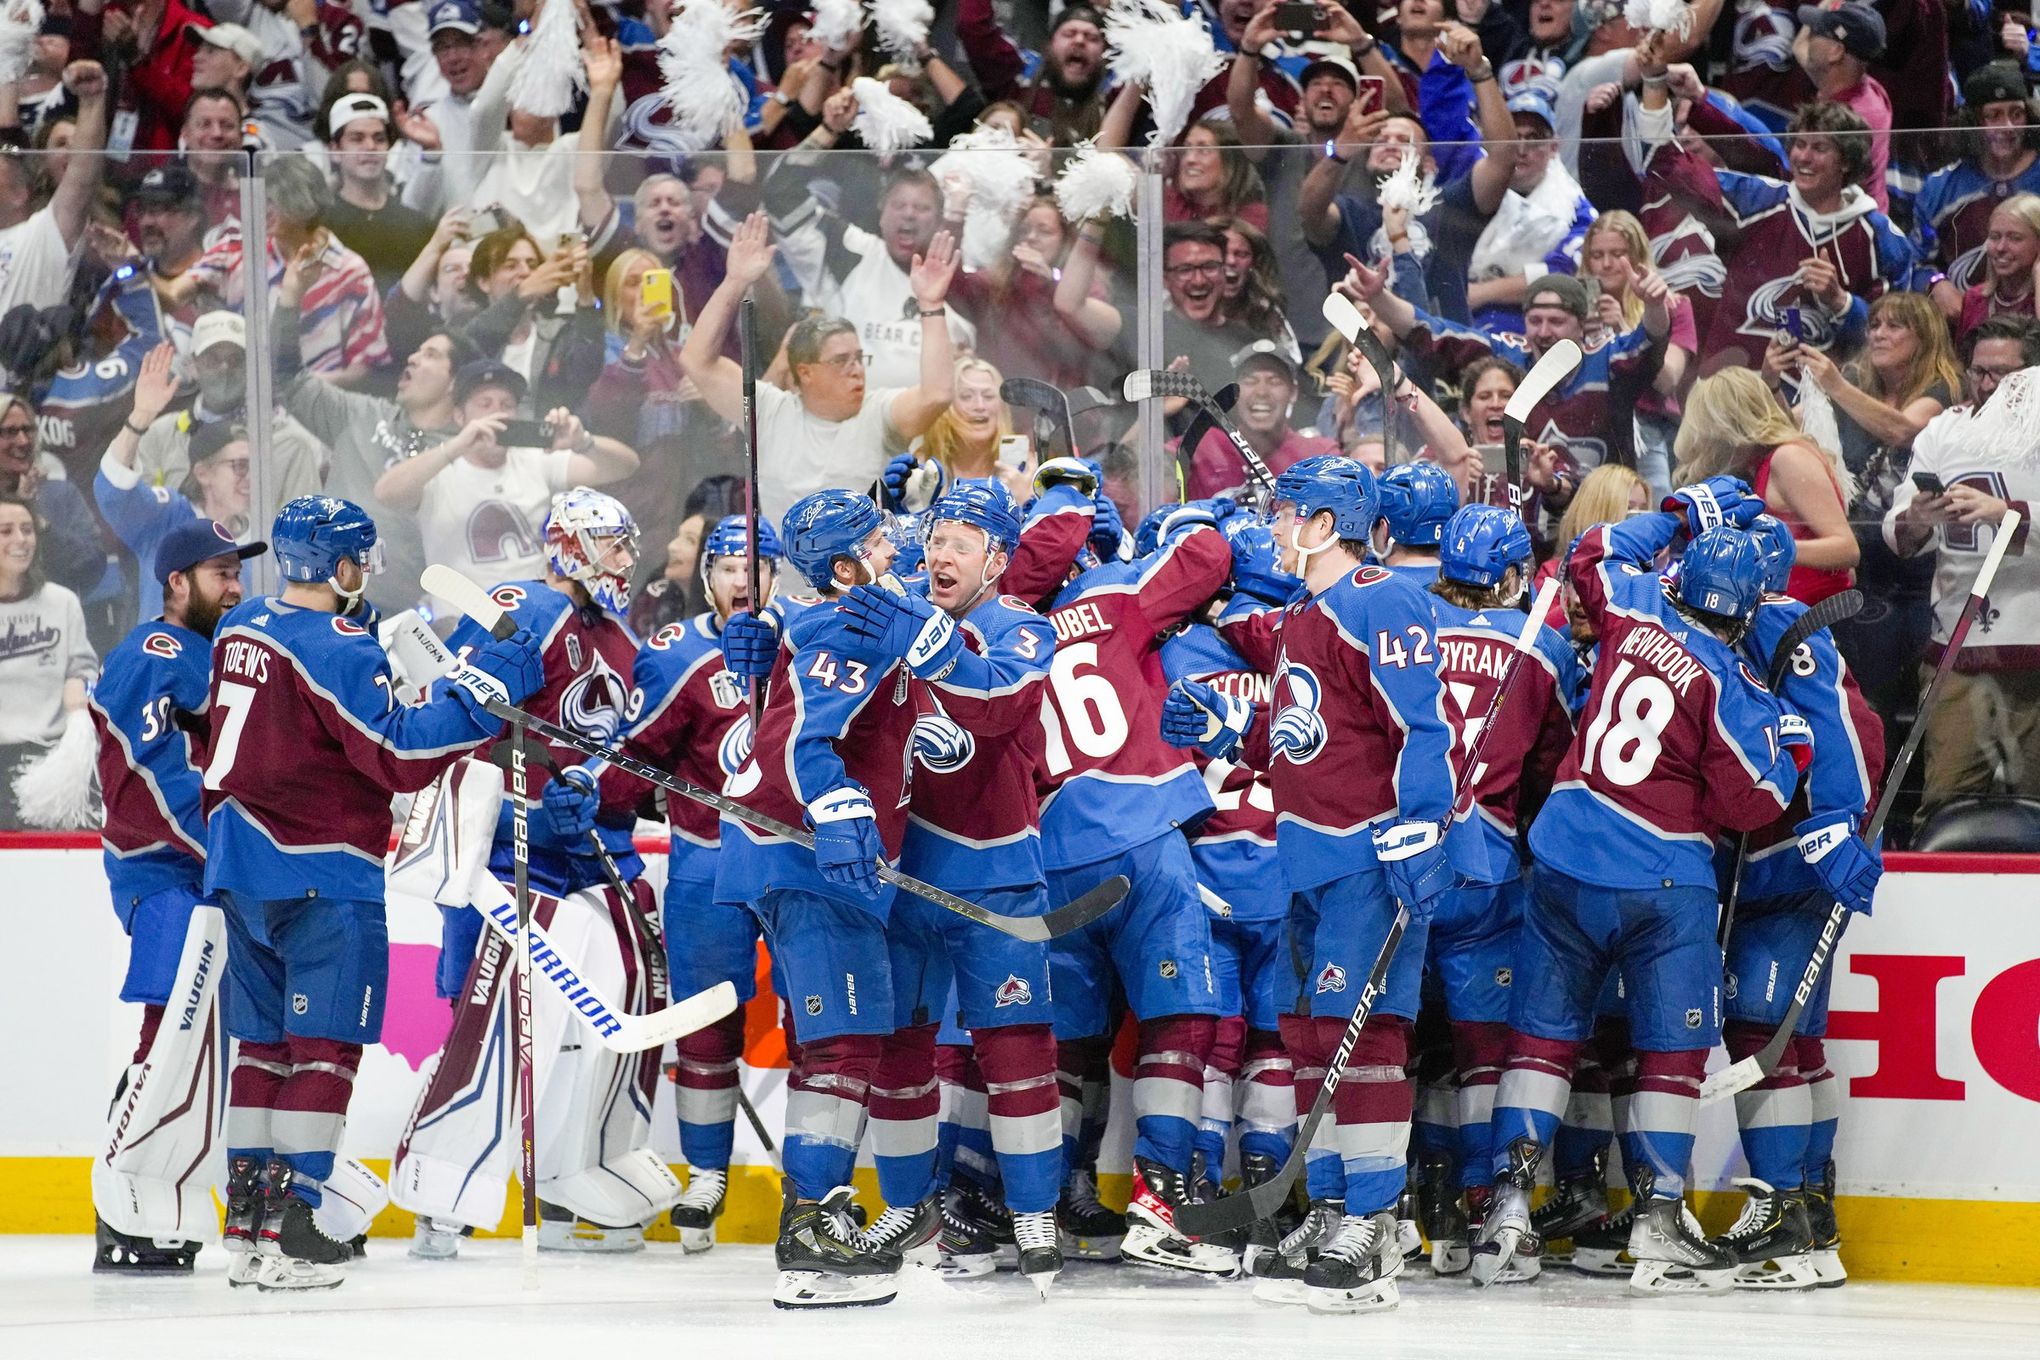 Colorado Avalanche: Which team did they used to be, relocated? Quebec